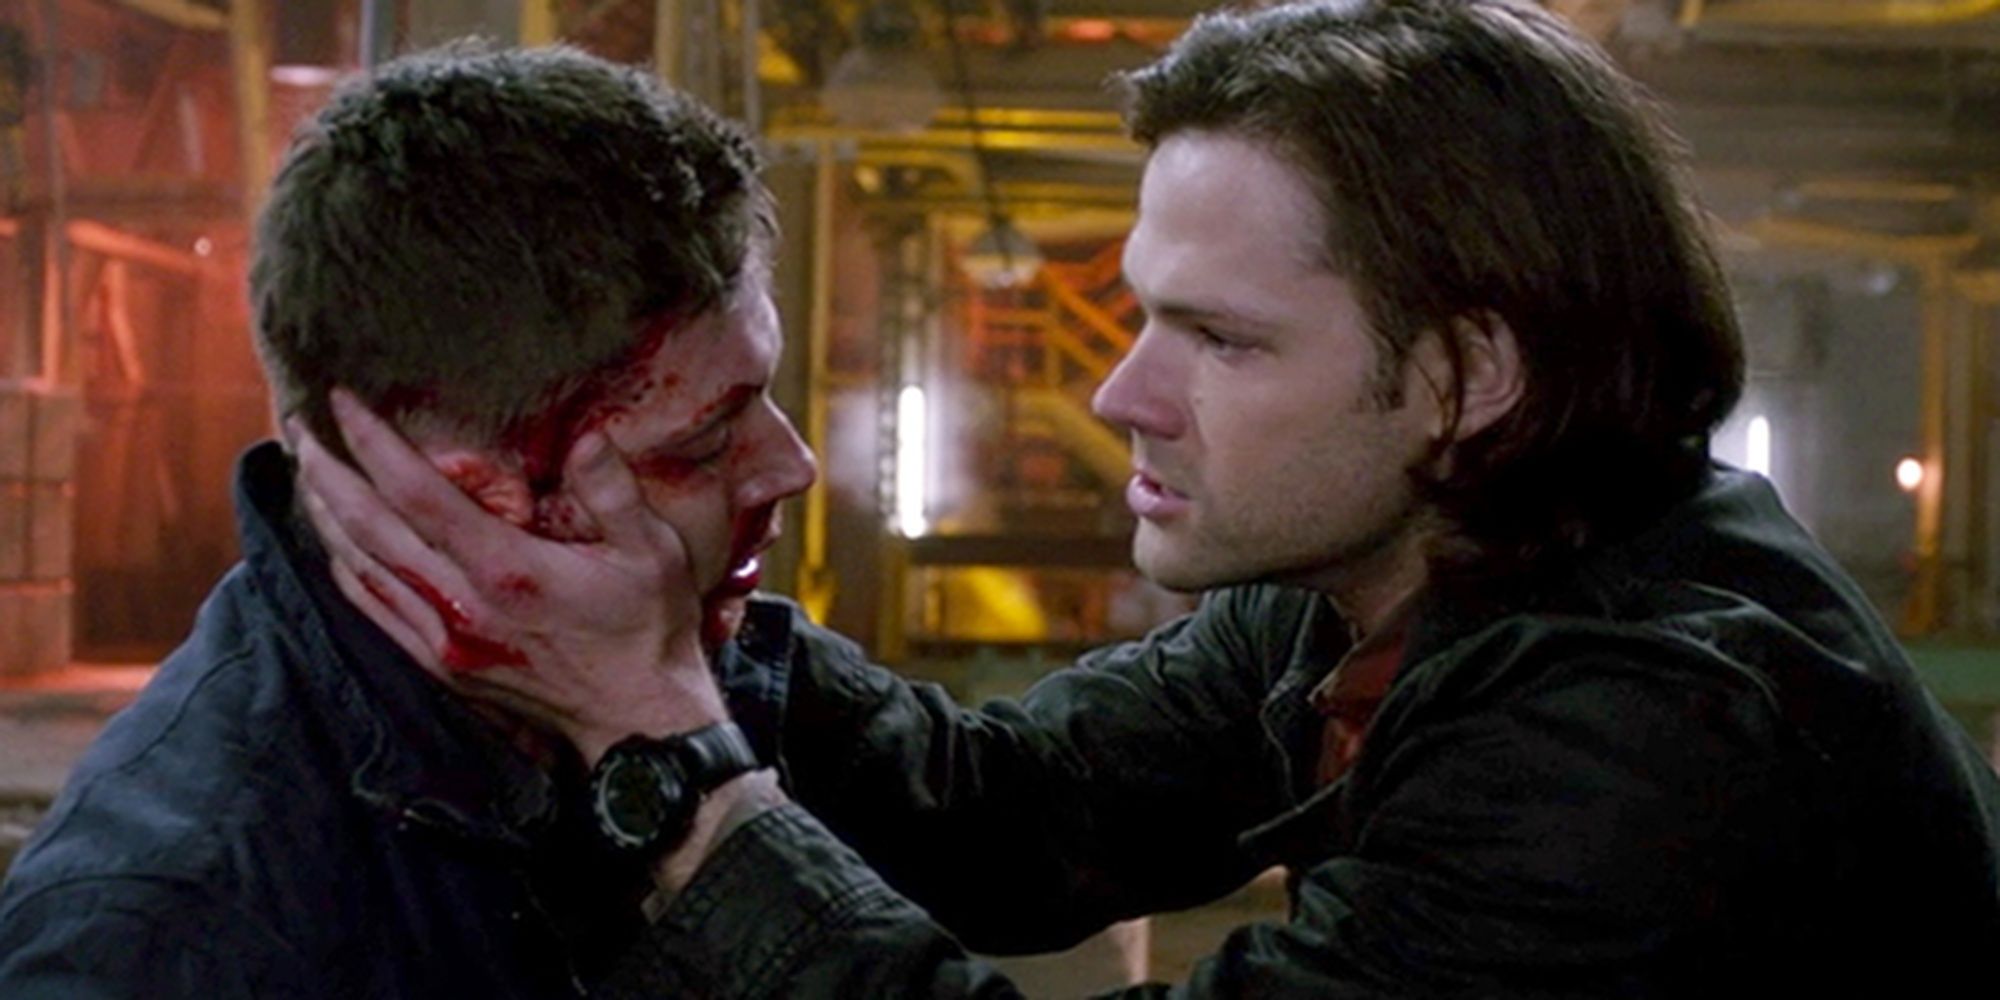 dean dying in sam's arms in spn